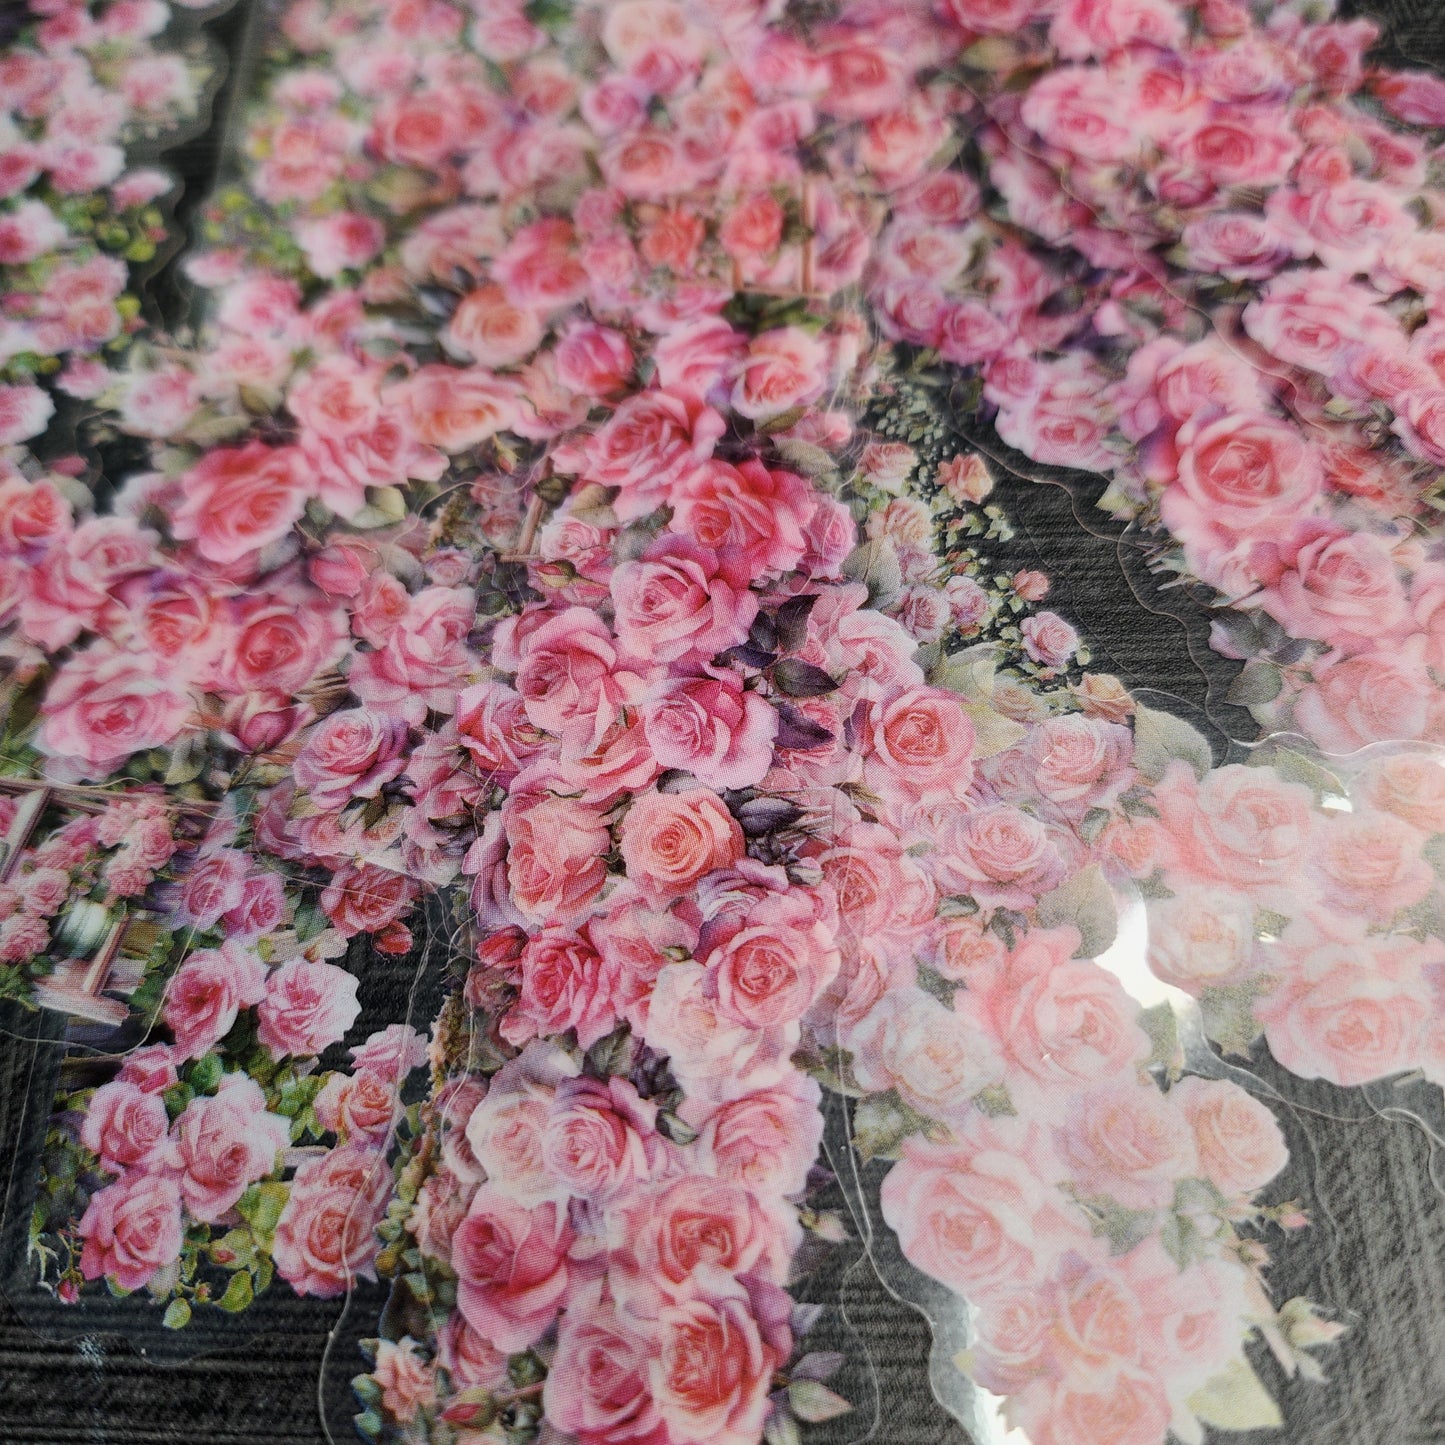 Pink Rose Stickers